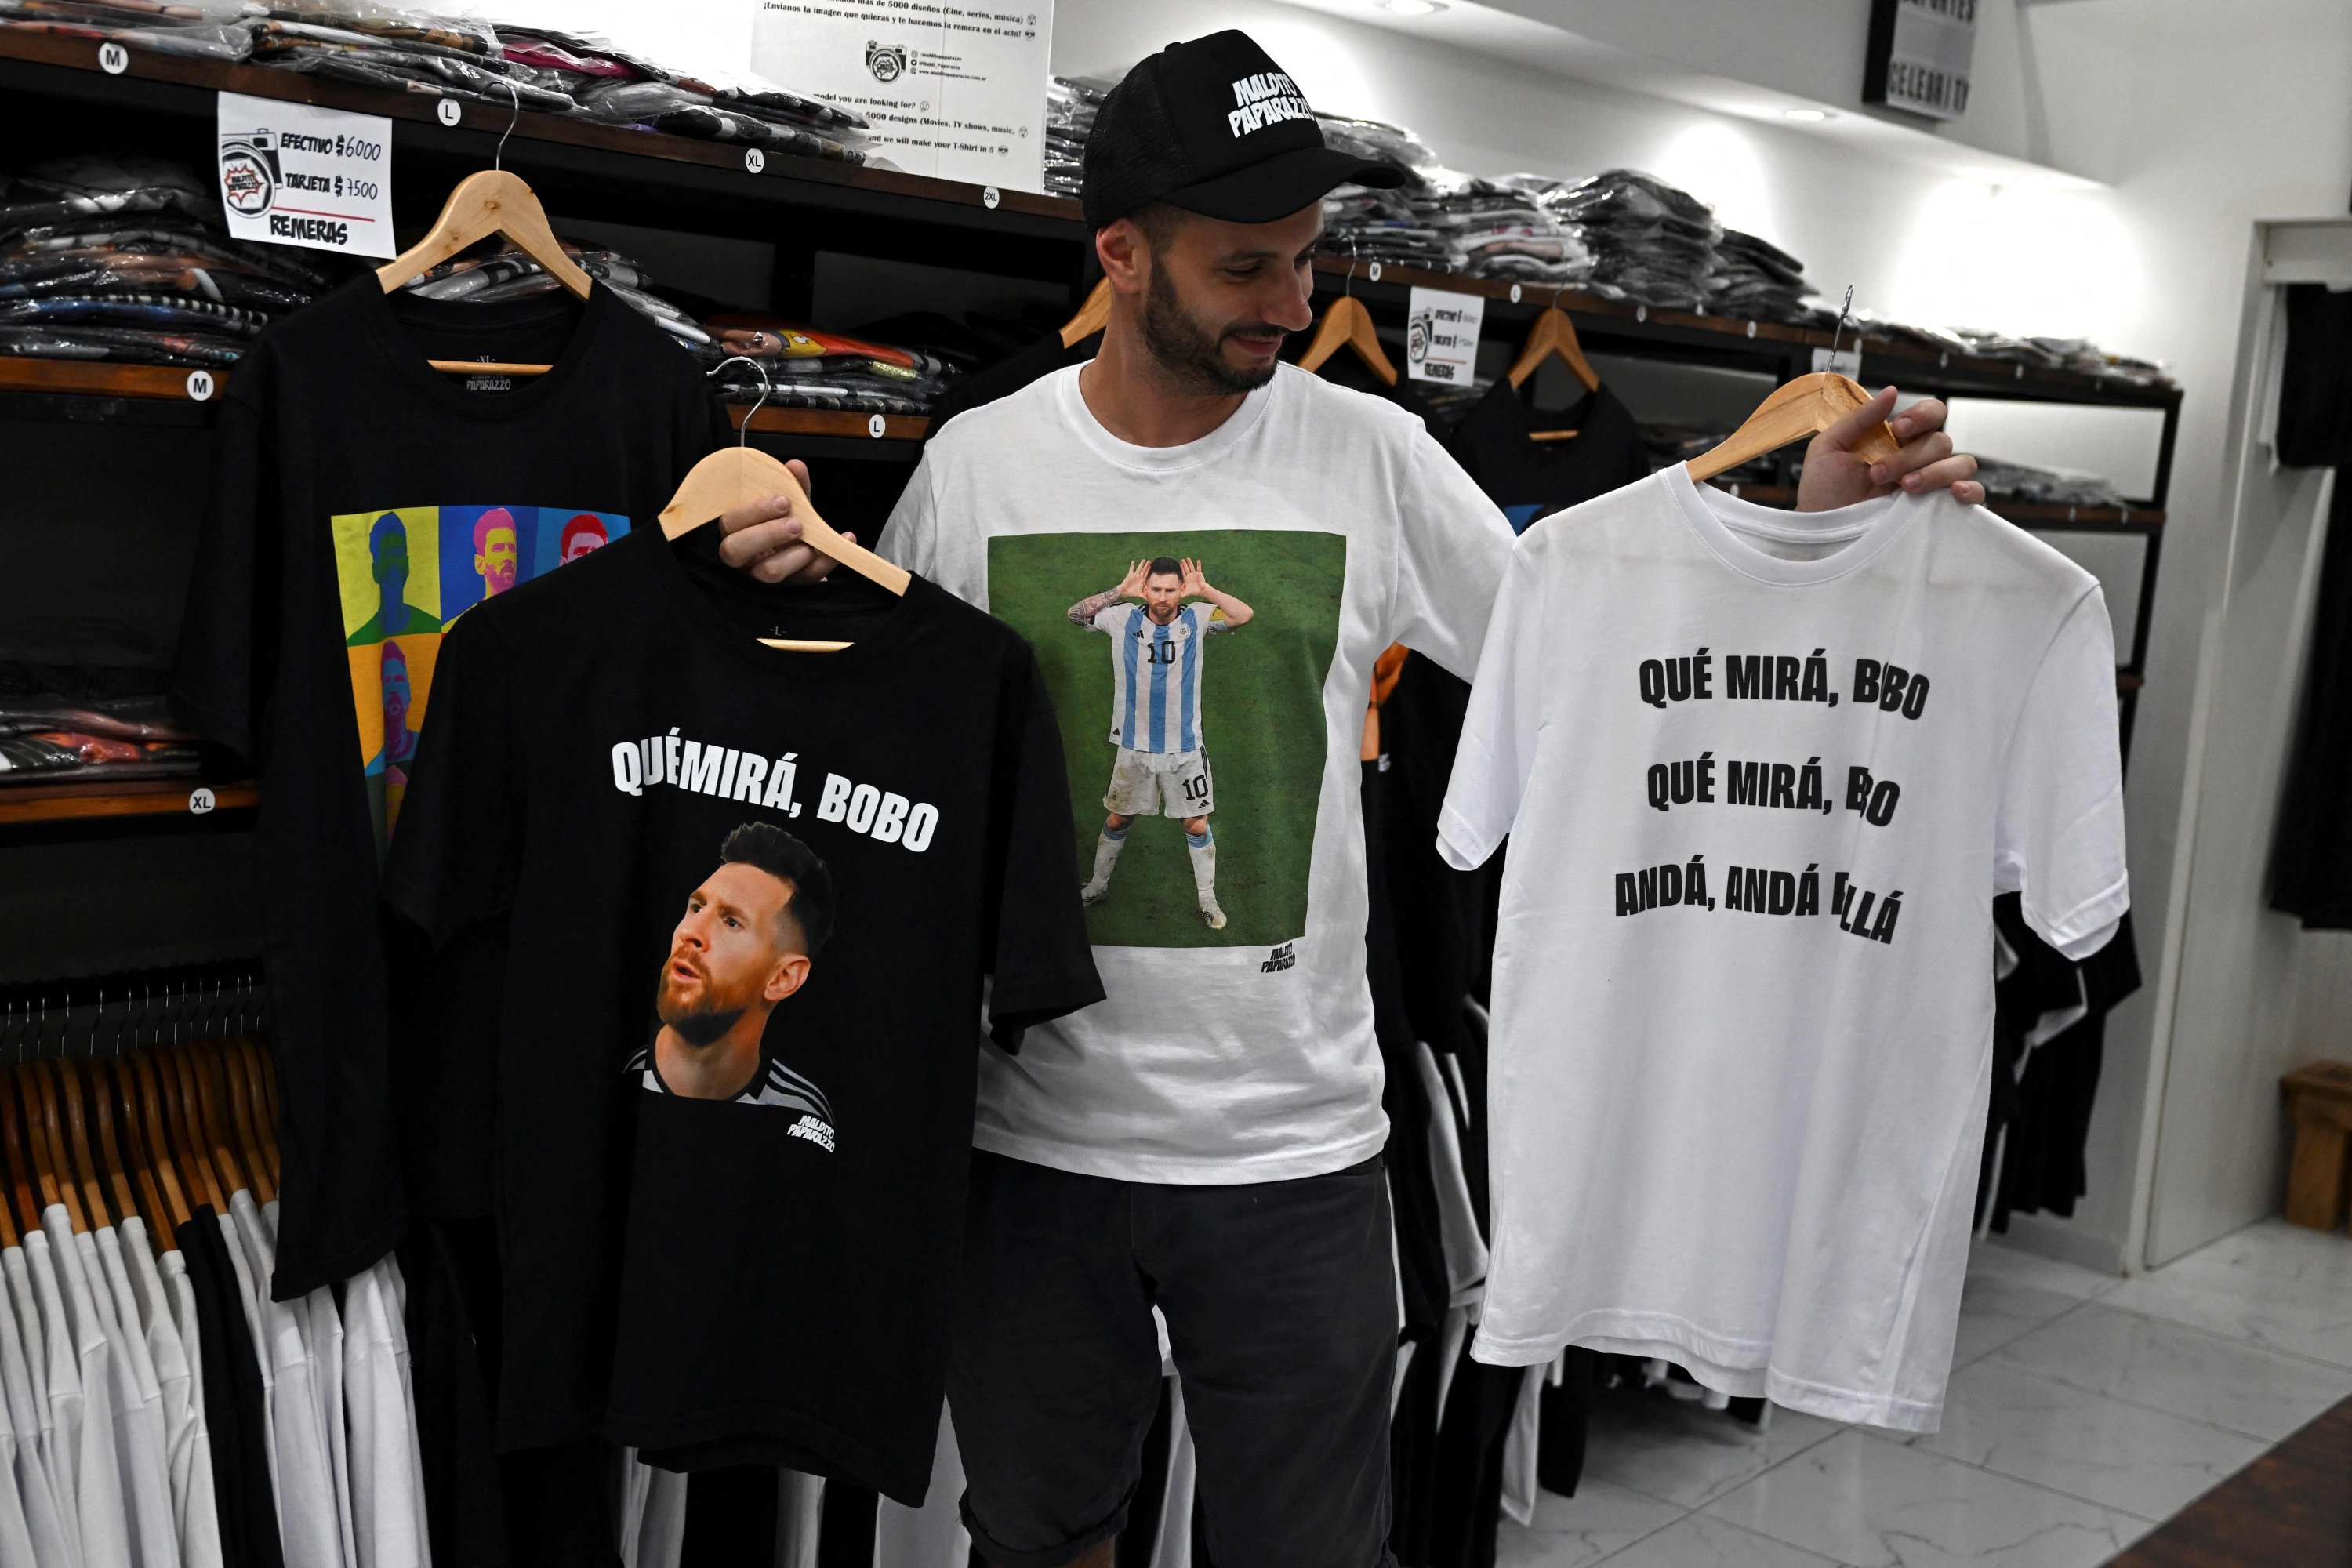 Haan knuffel Aardbei Messi's 'Que miras bobo?' taunt merch takes Argentina by storm | Daily Sabah